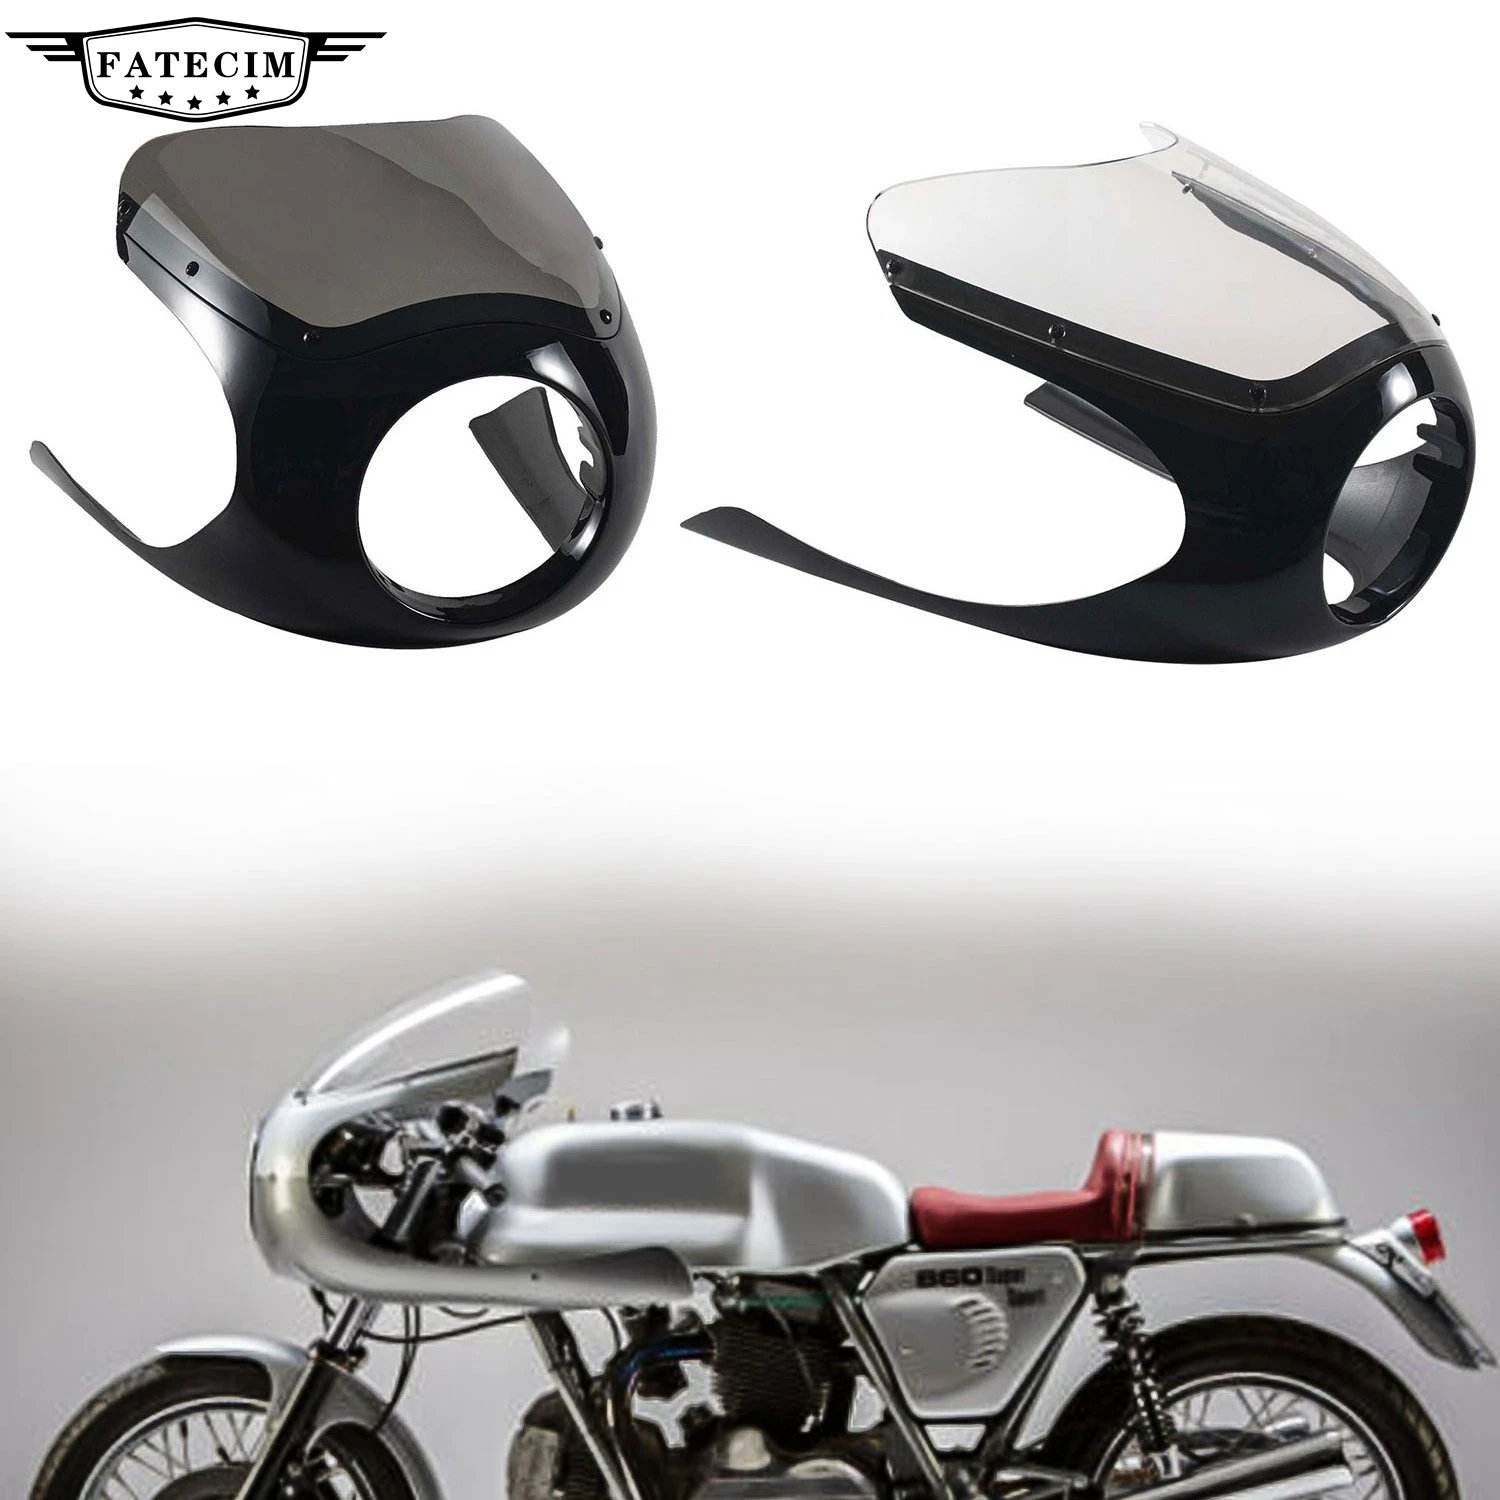 

Rickman Style Motorcycle Fairing Front Fairing Classic For Harley Cafe Racer